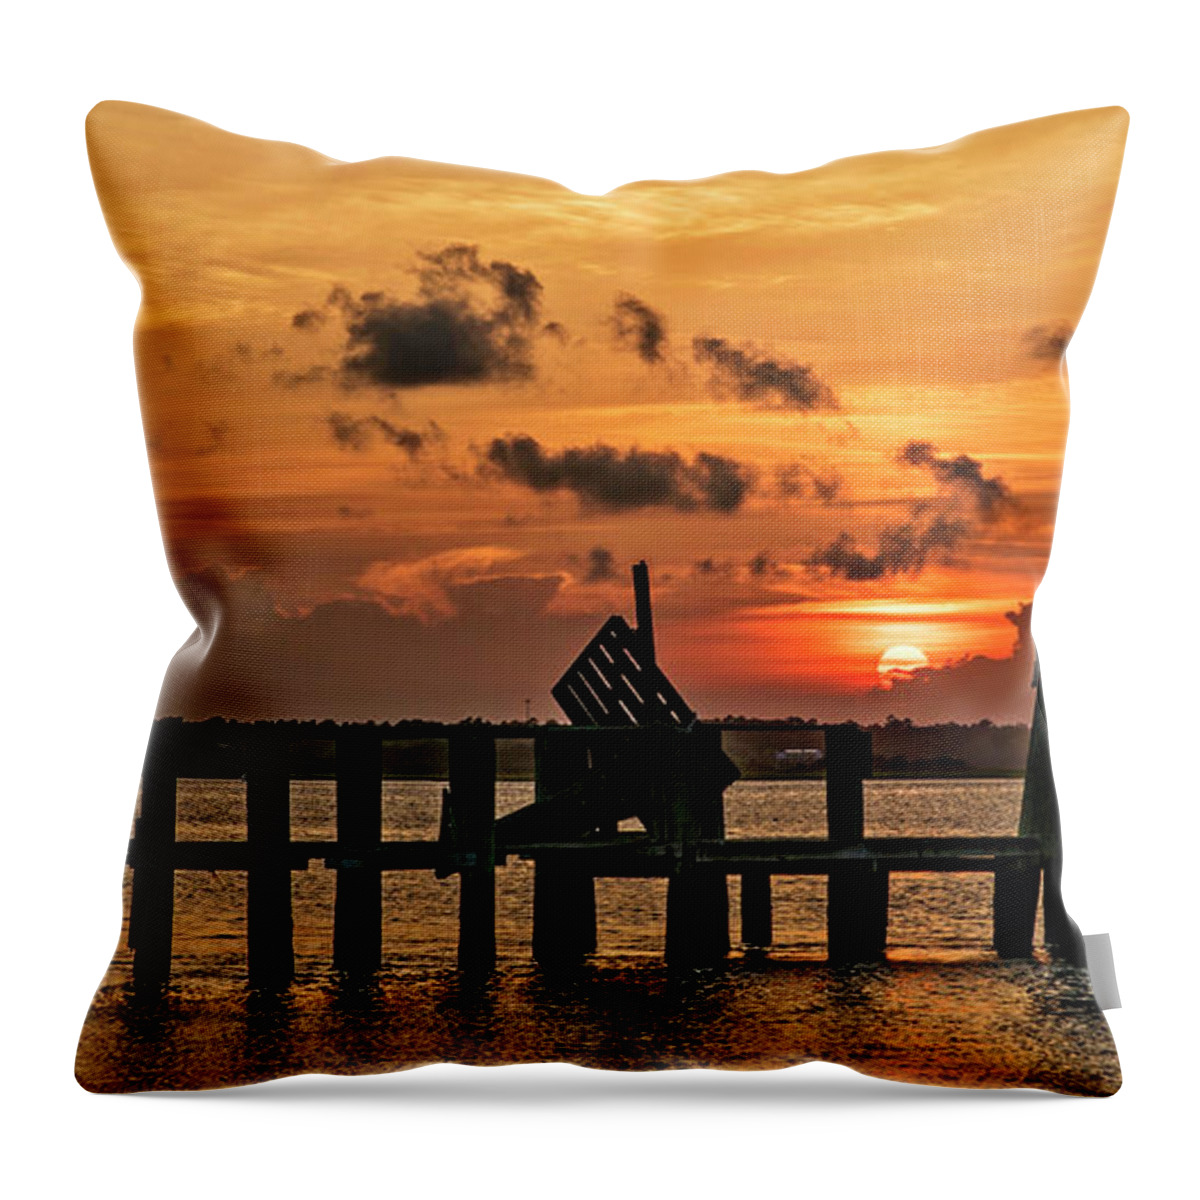 Sunset Throw Pillow featuring the photograph Peeking Out by DJA Images